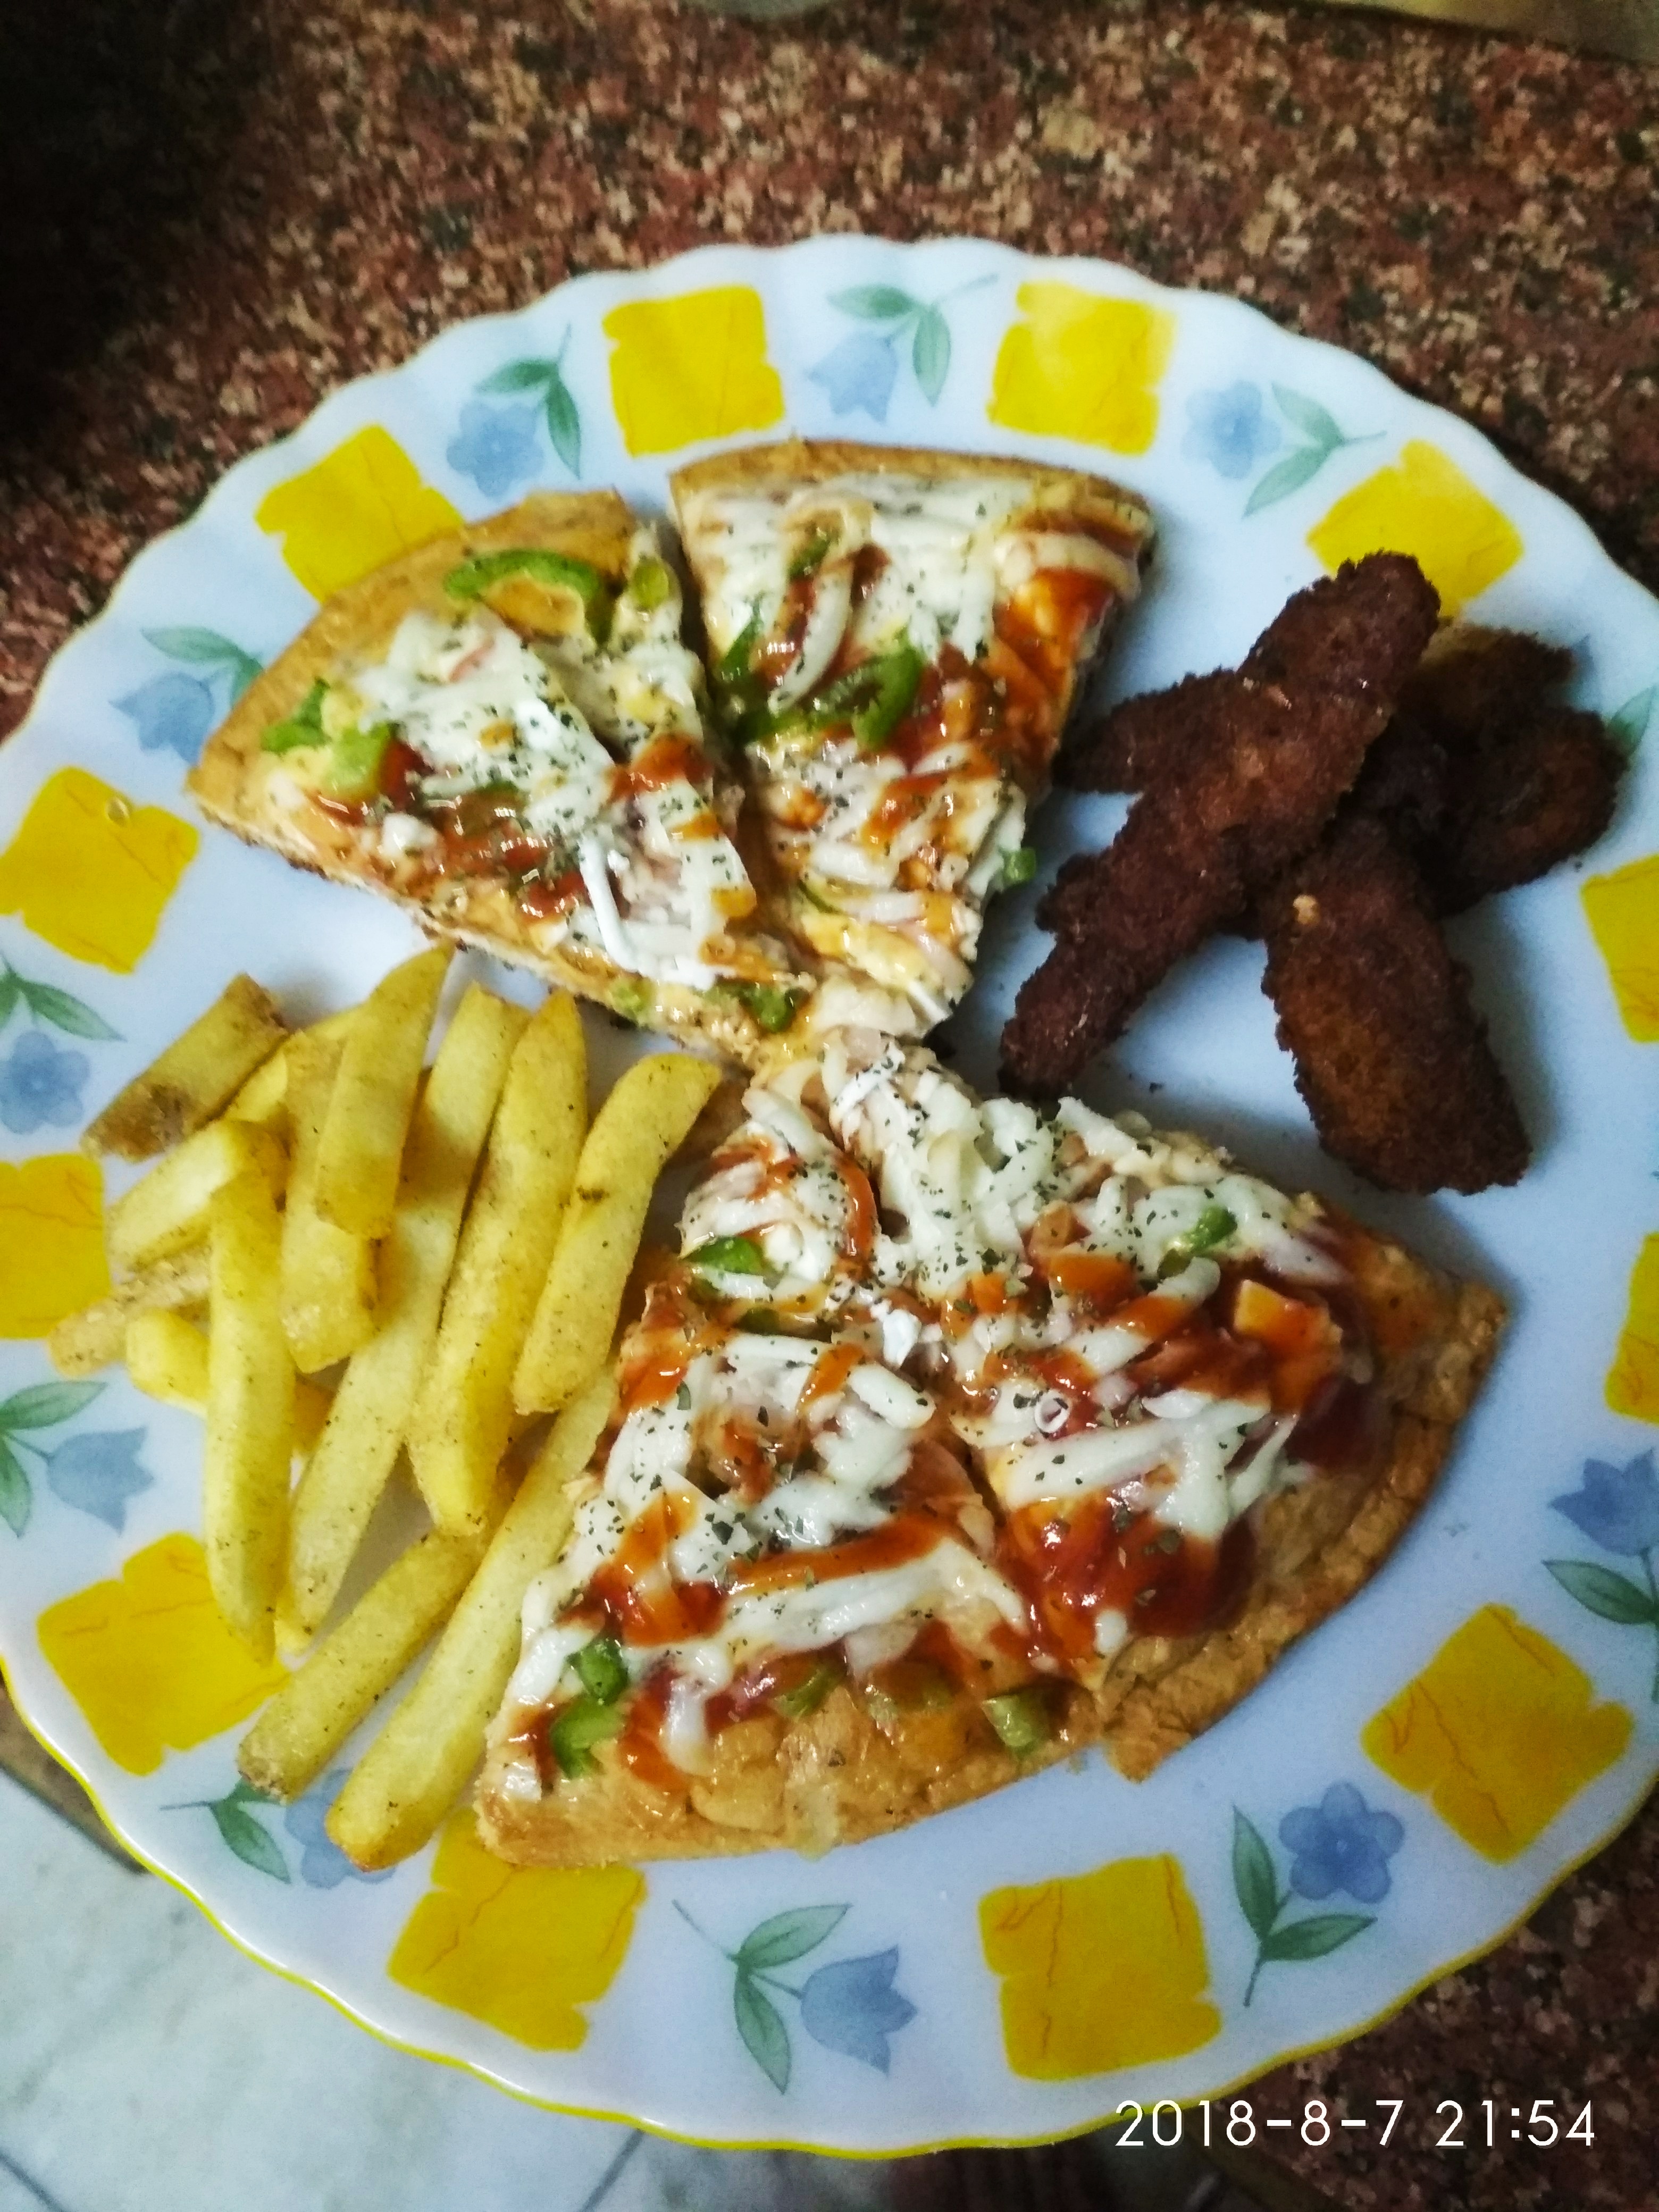 Cheesy pizza with some fish and finger feies